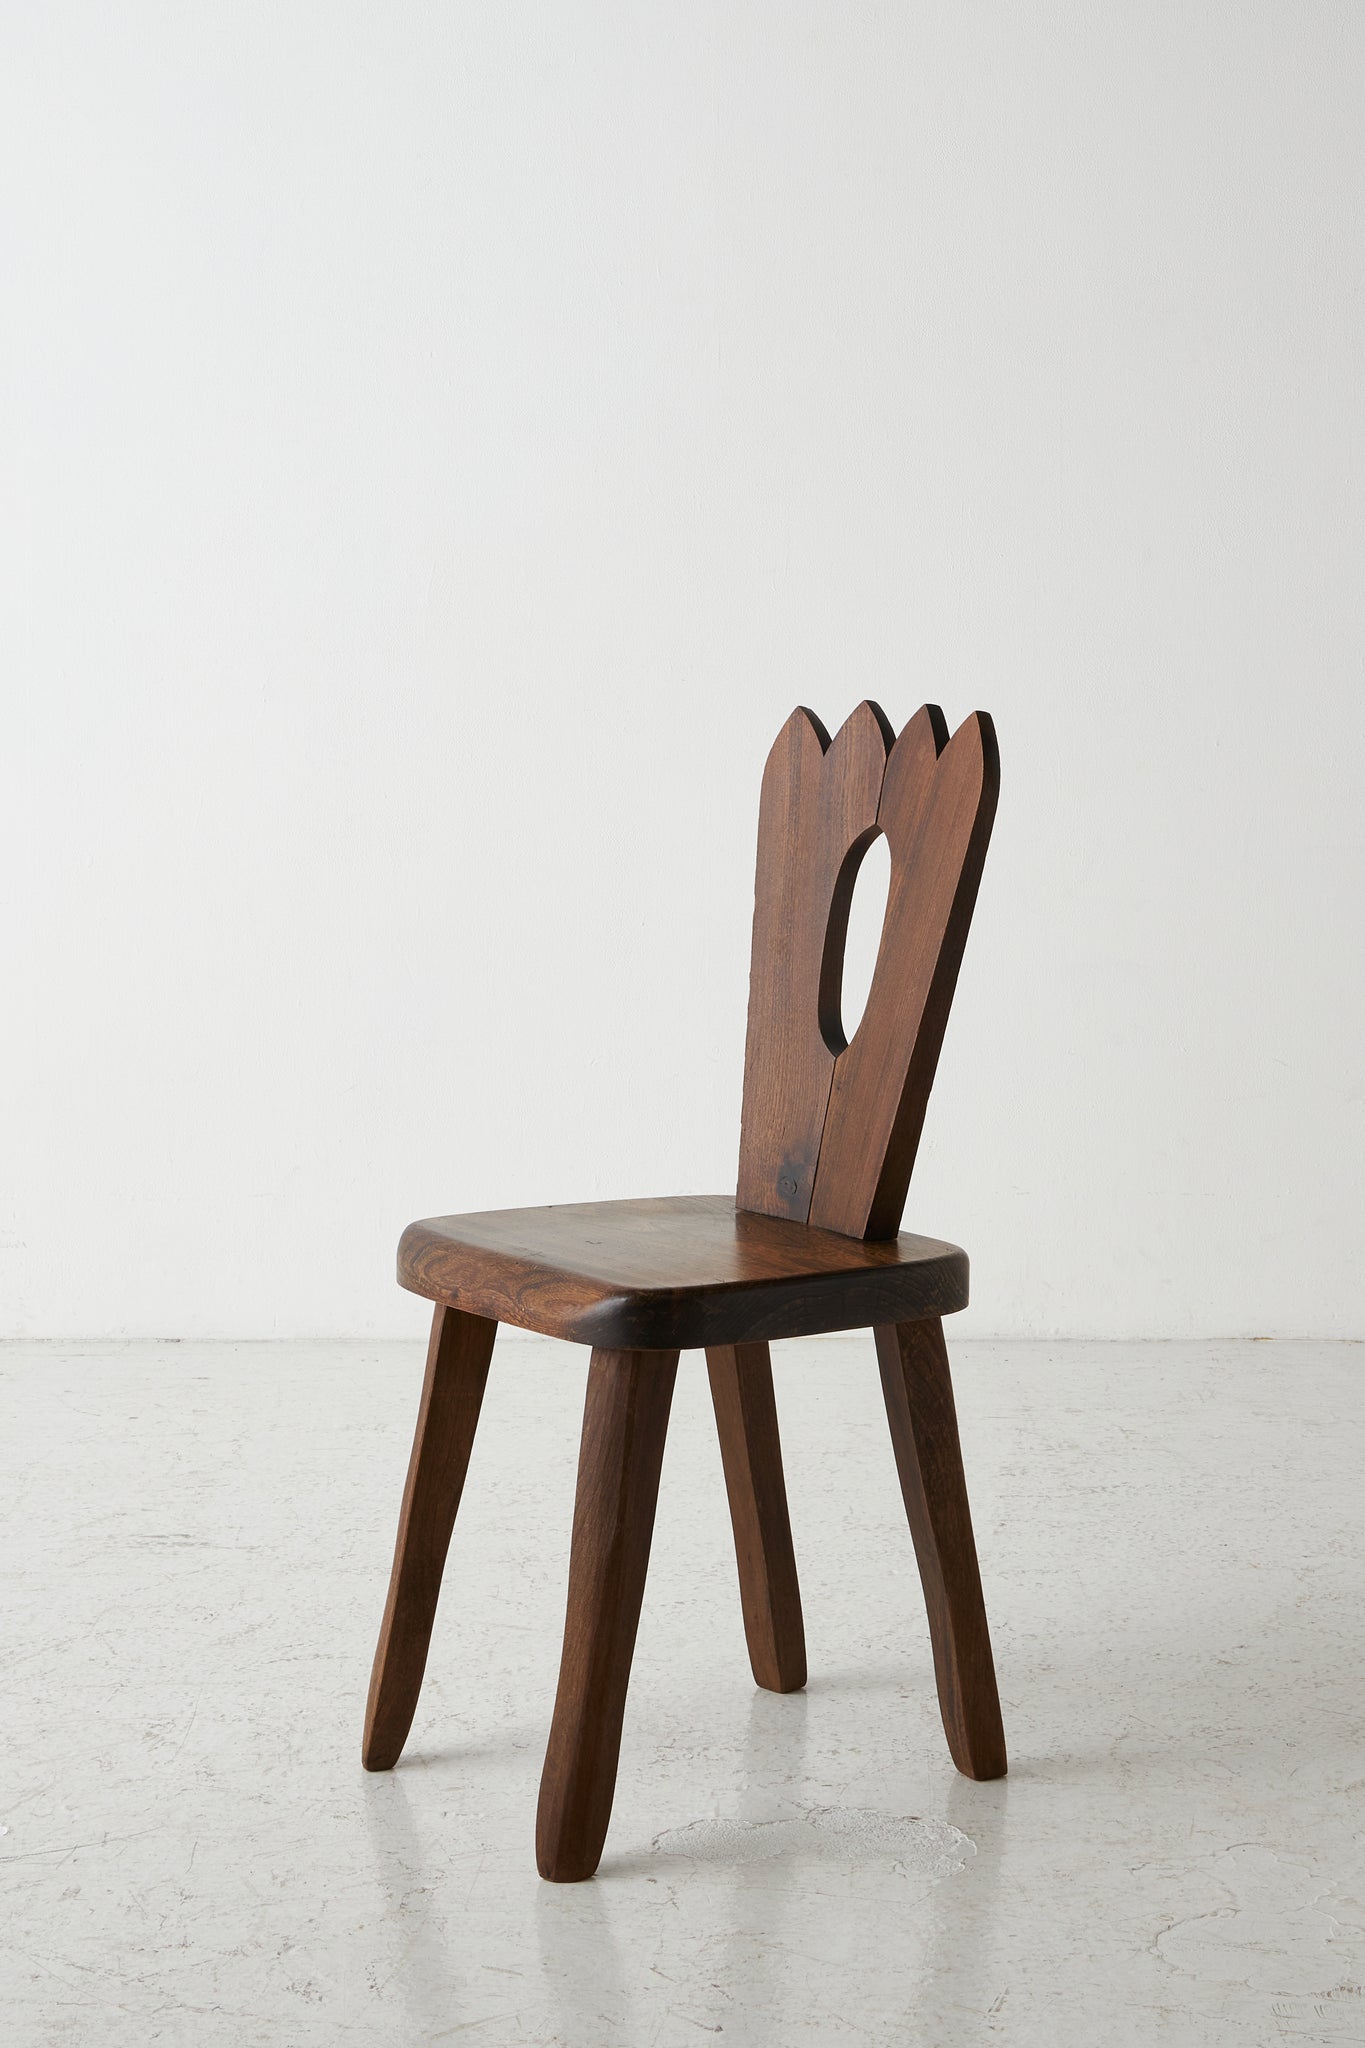 DINING CHAIRS C